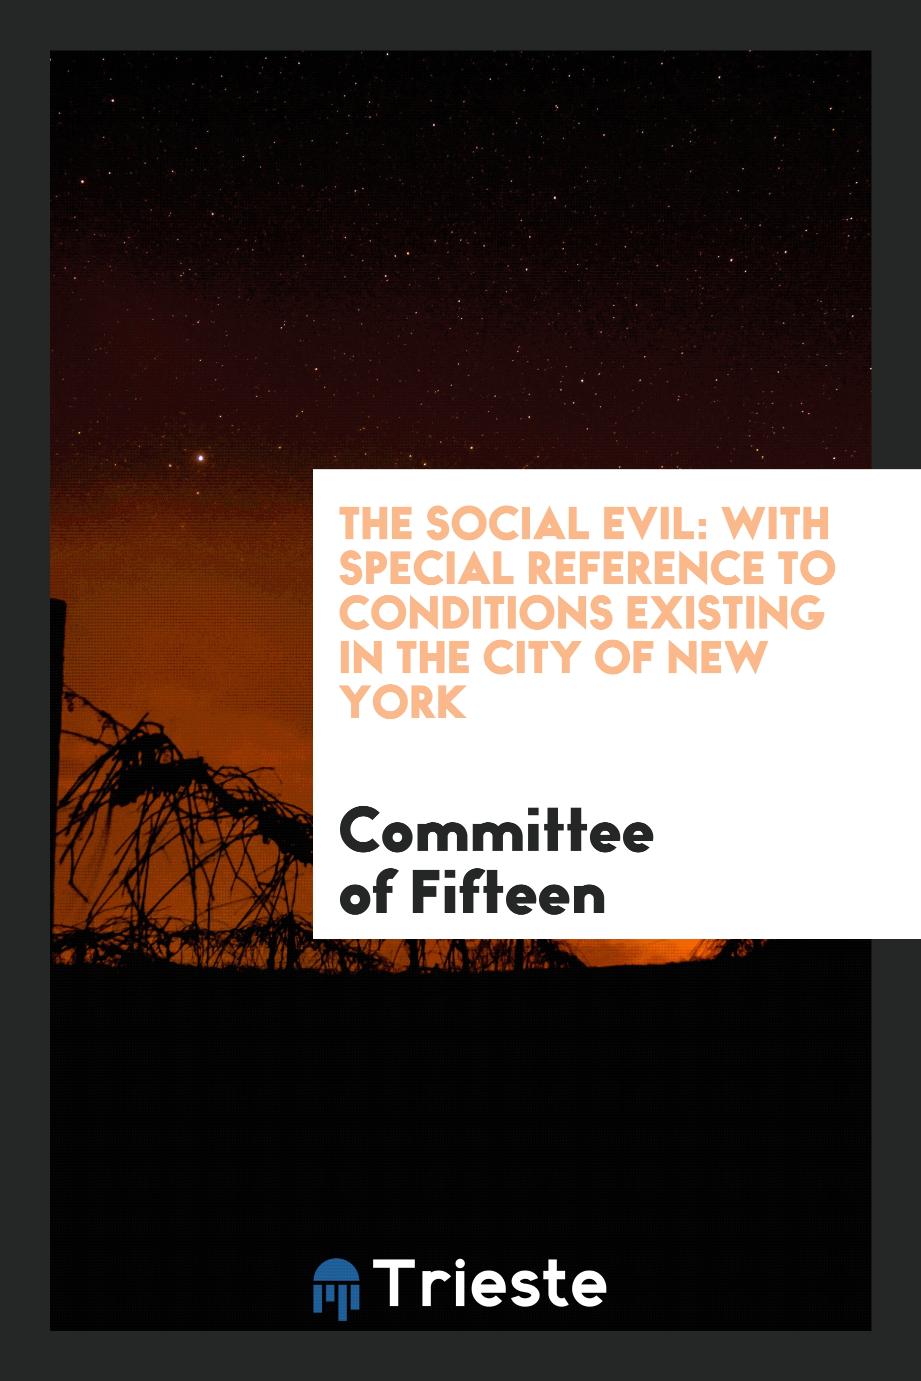 The Social Evil: With Special Reference to Conditions Existing in the City of New York